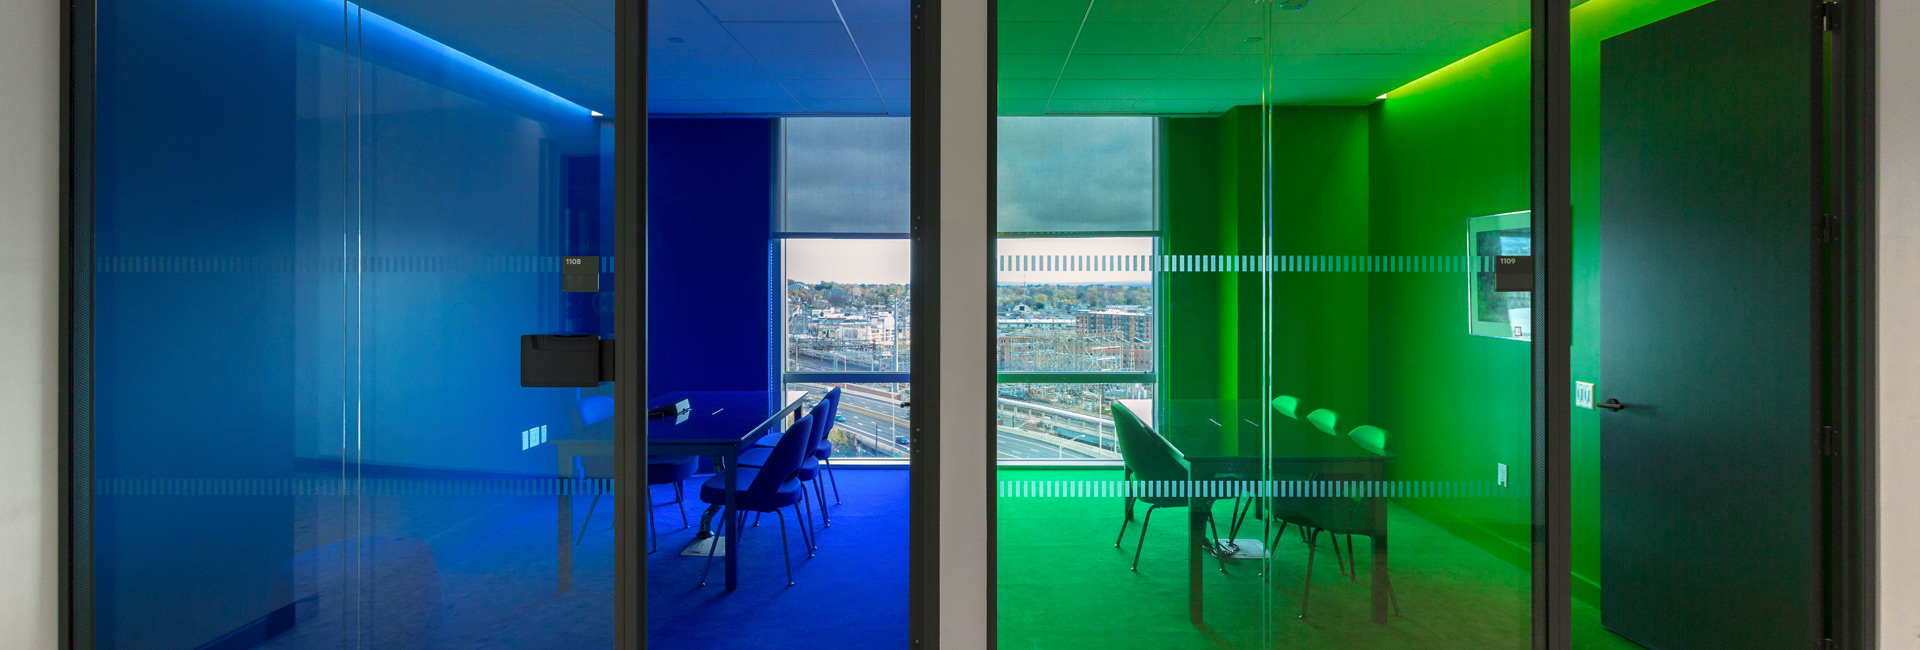 Two conference rooms at Philip Morris International